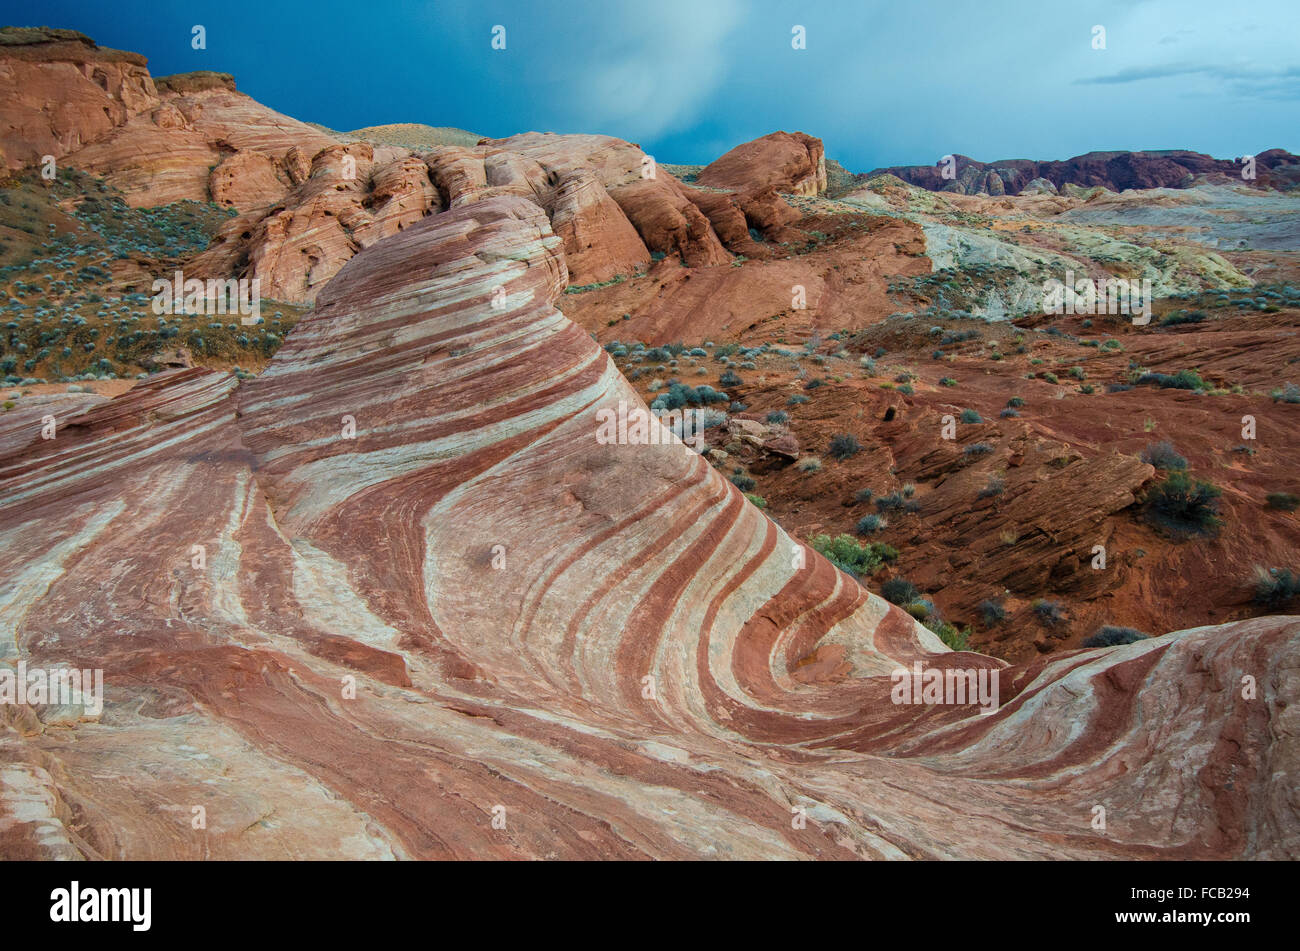 Dark ominous clouds glide past the swirling red rock striations of Valley of Fire State Park. Stock Photo